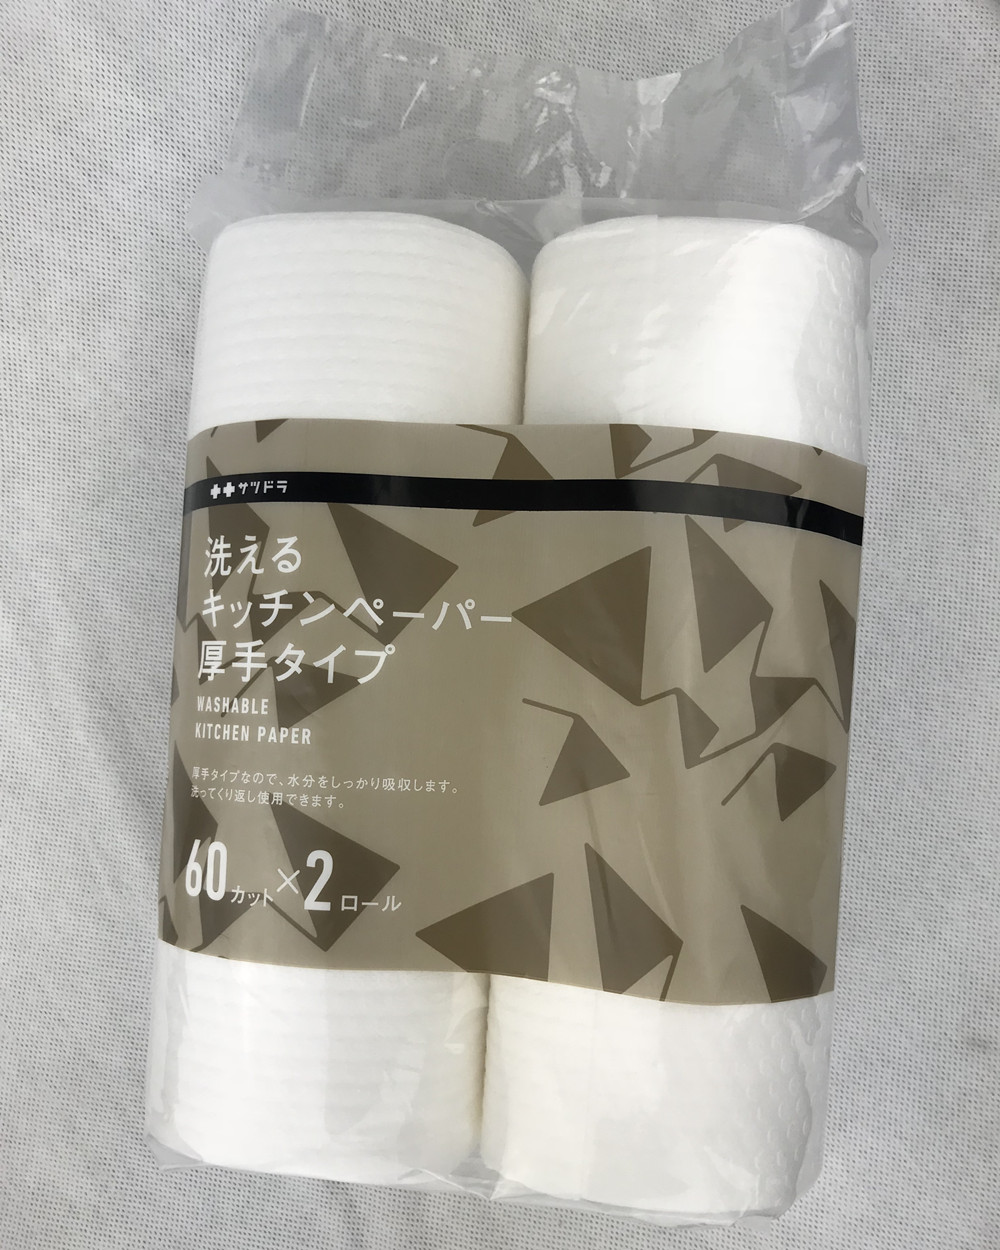 honeycomb pattern houhold wipes